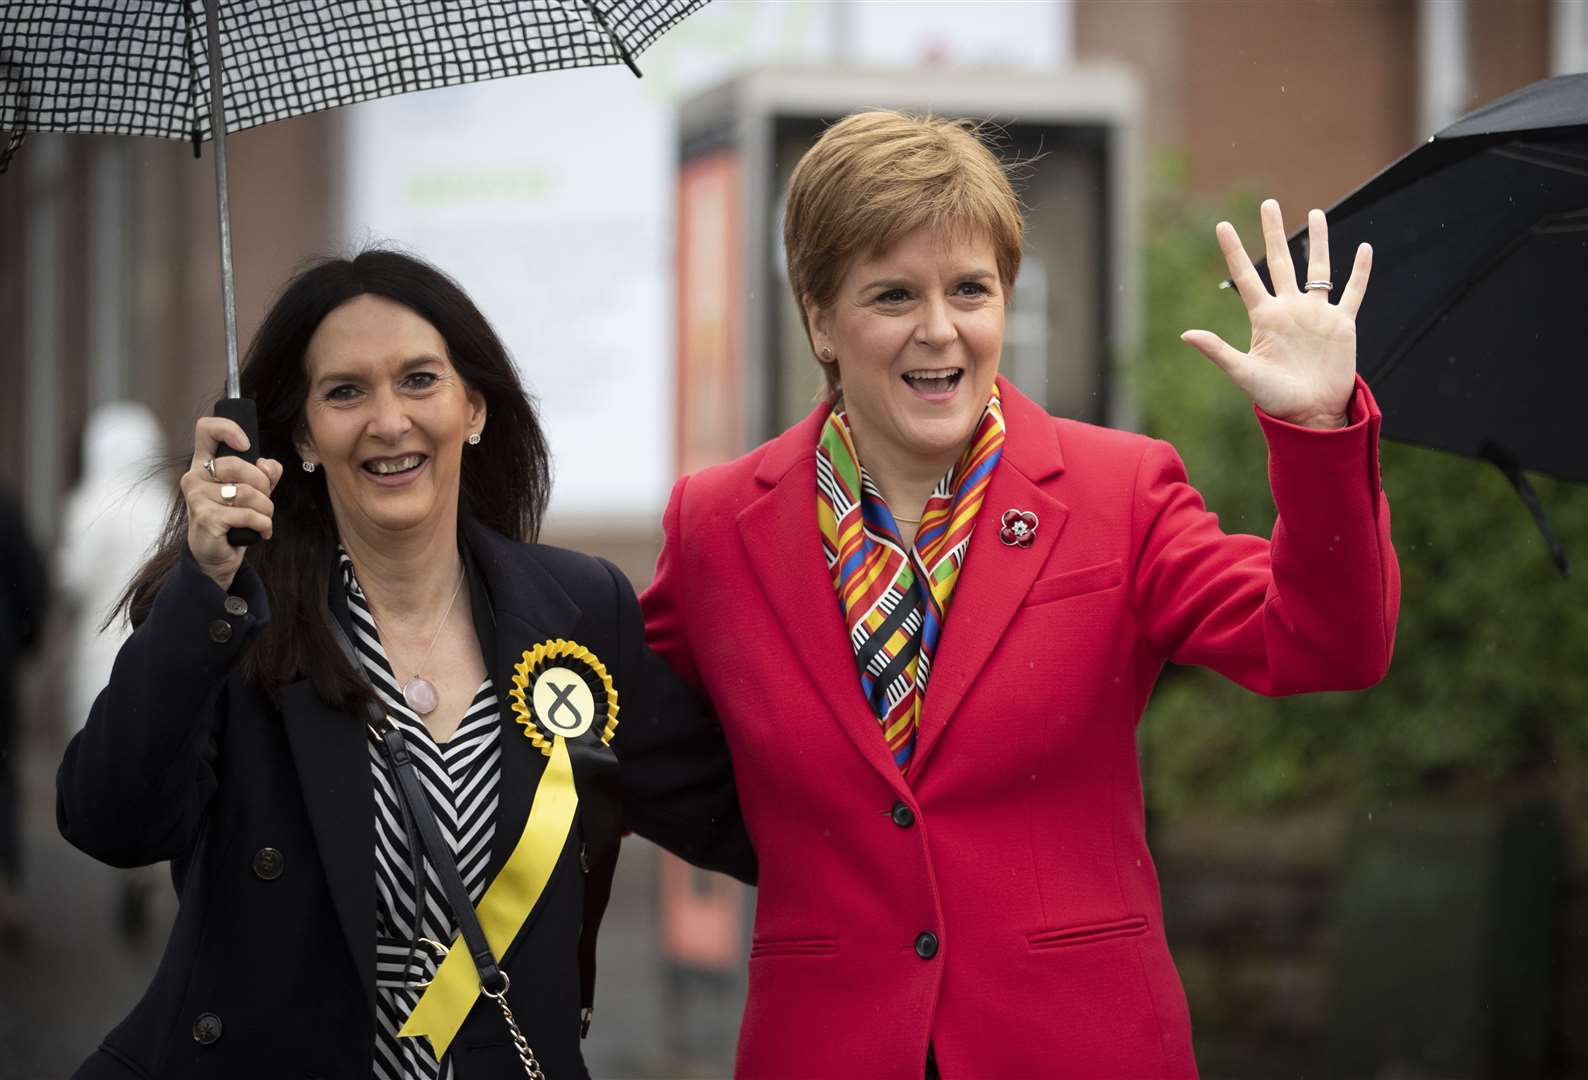 Nicola Sturgeon is among those to call for Ms Ferrier’s resignation as an MP (Jane Barlow/PA)